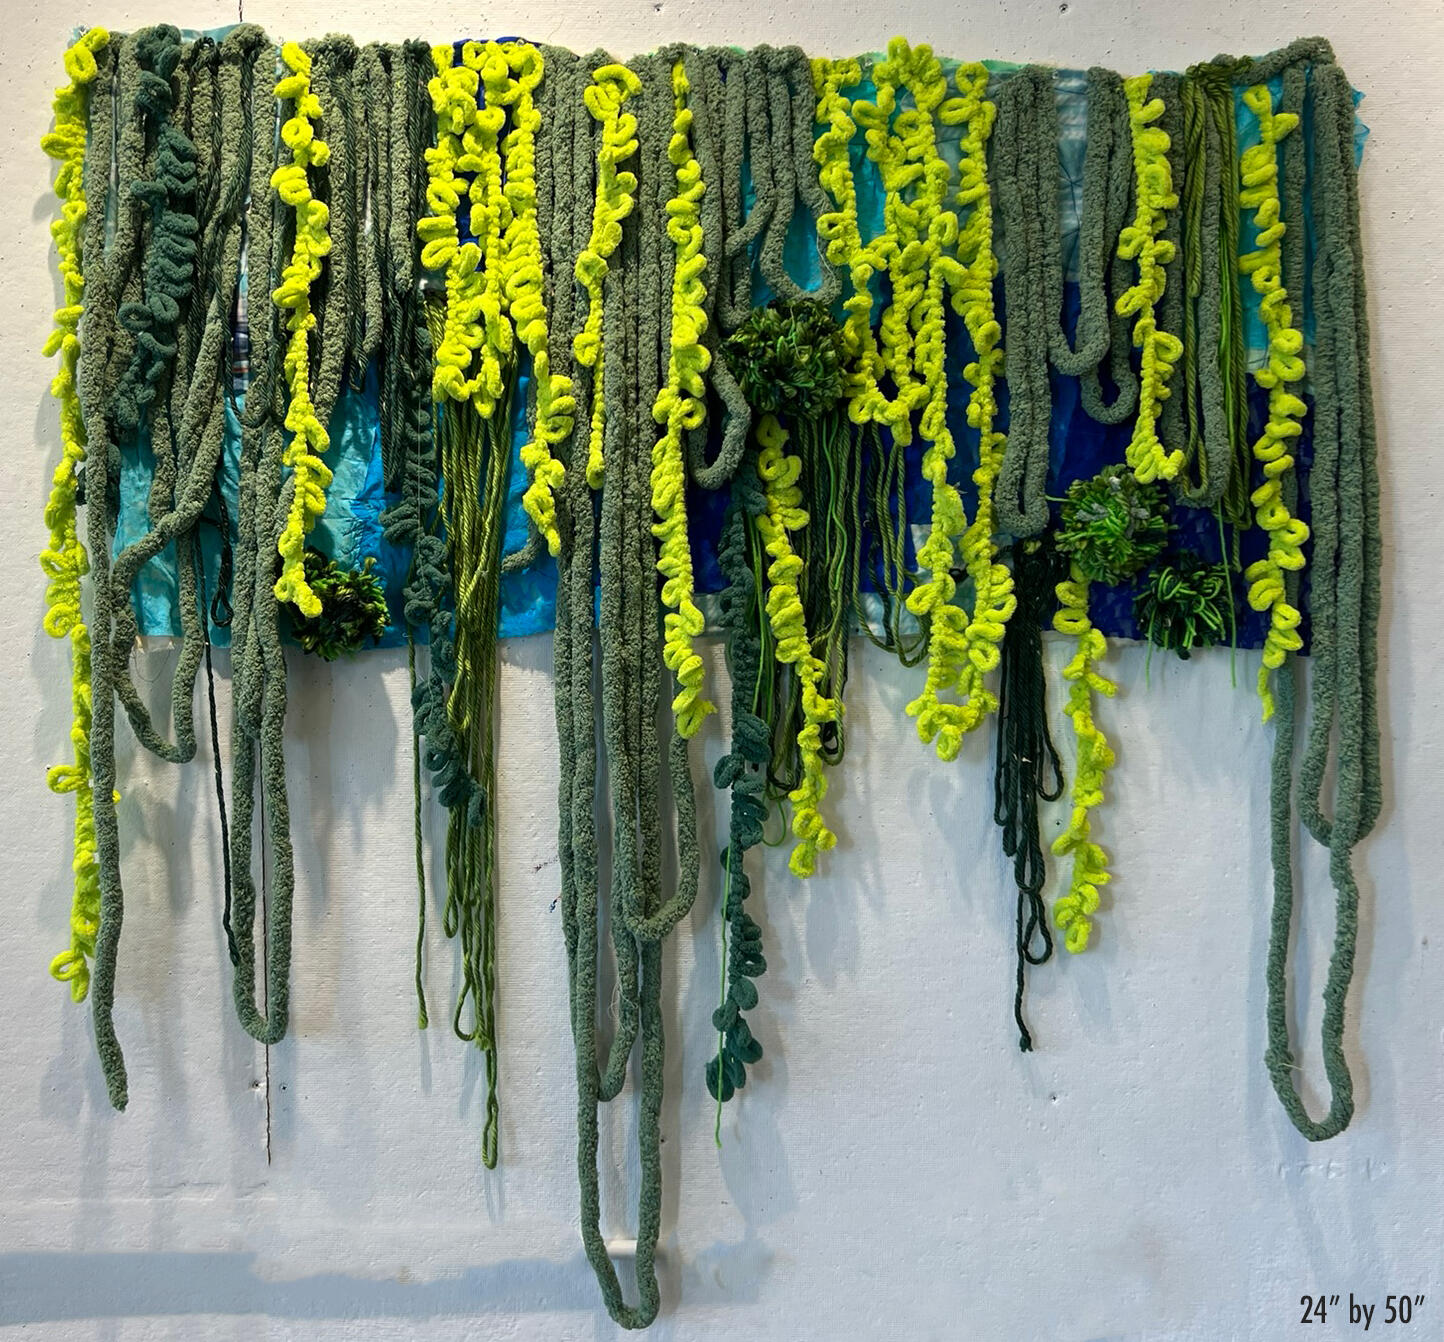 Blue textile rectangular with long thick green yarn strands dangling like vines